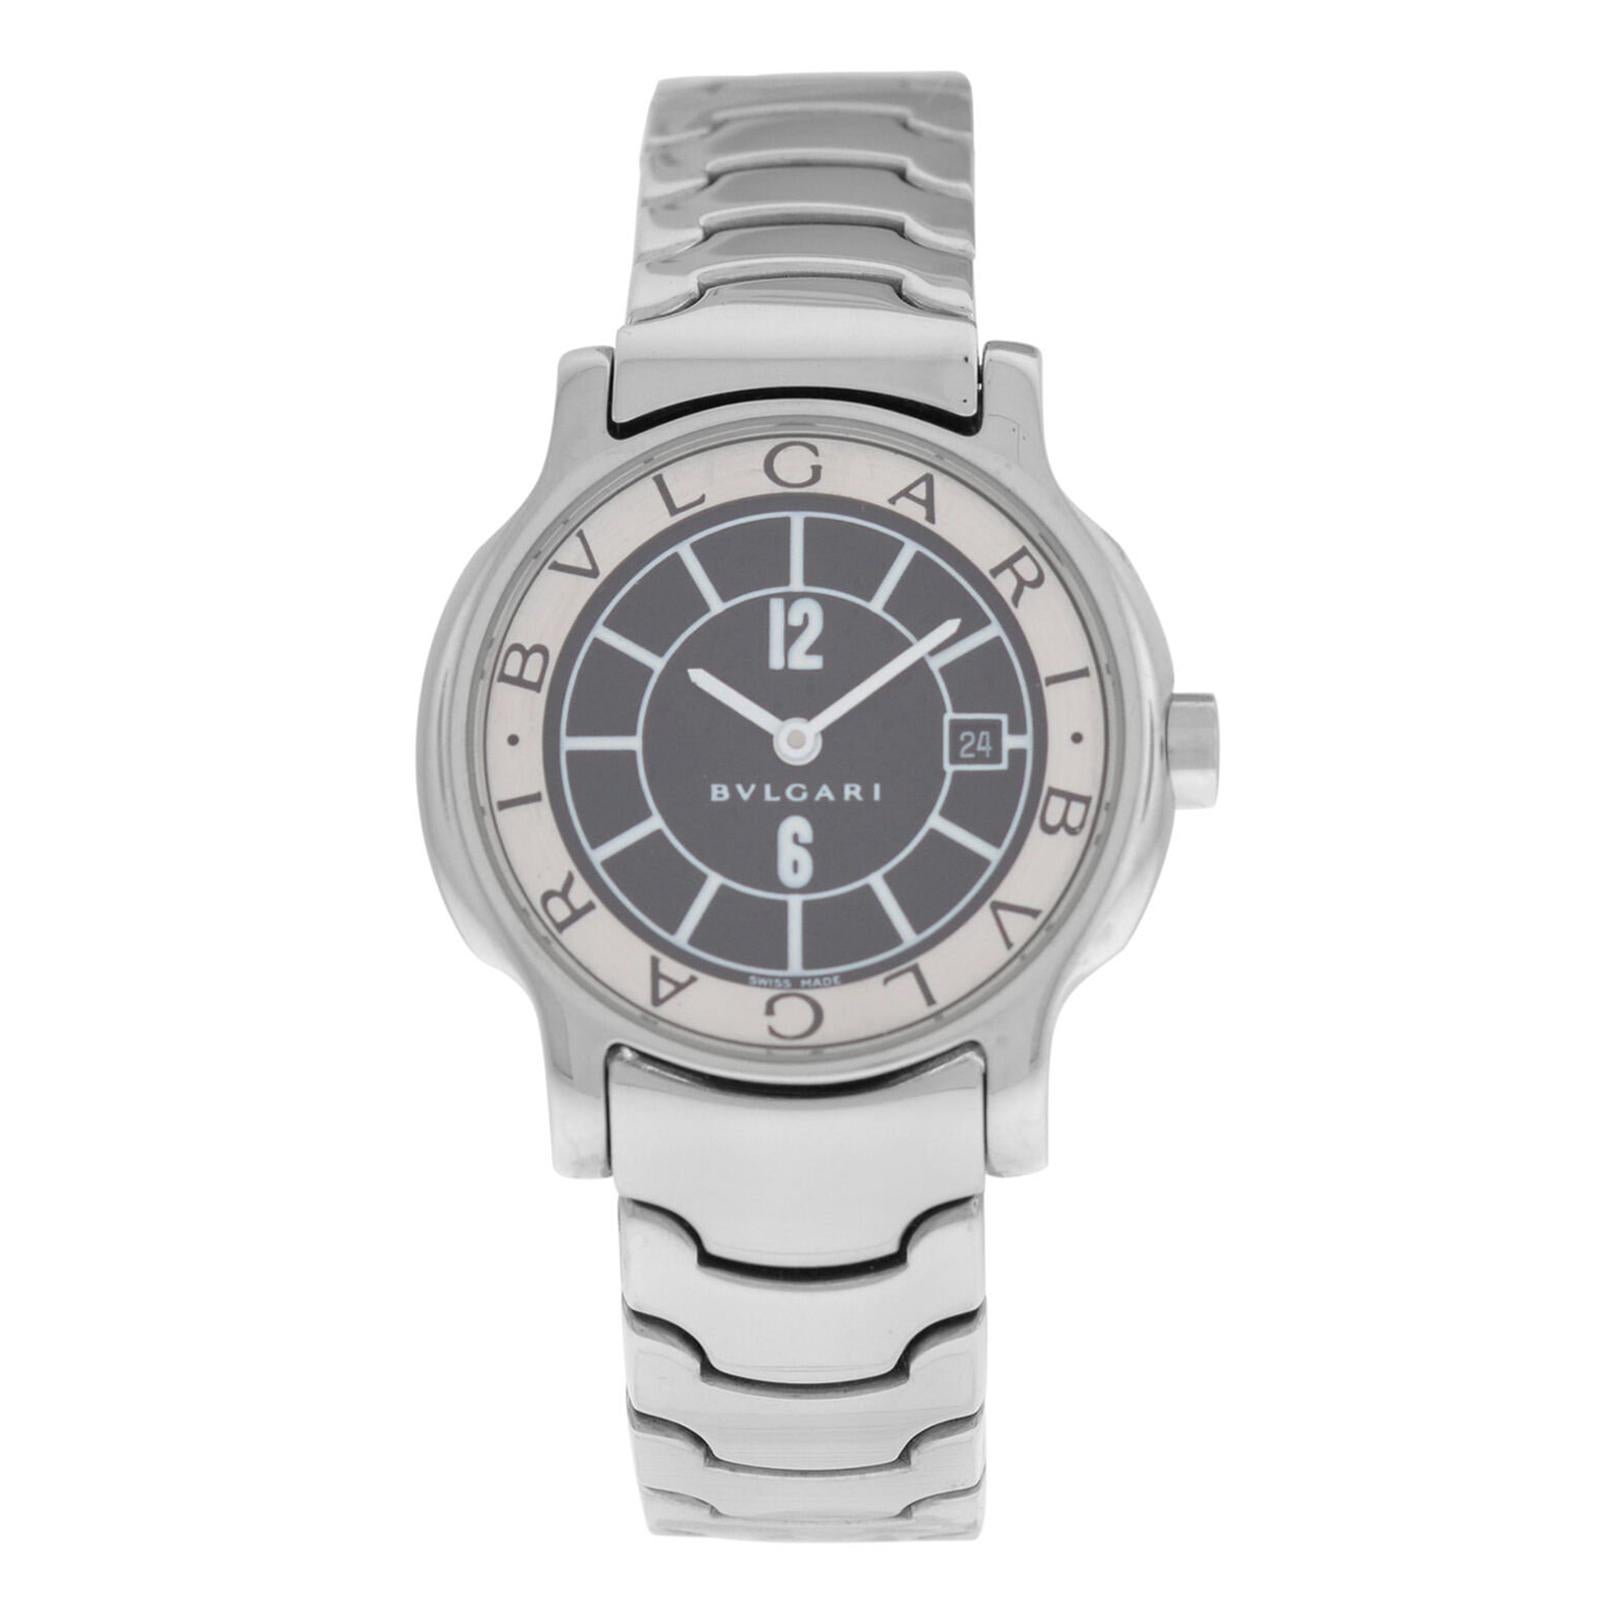 Ladies Bvlgari Solotempo ST29S Stainless Steel Date Quartz Watch For Sale